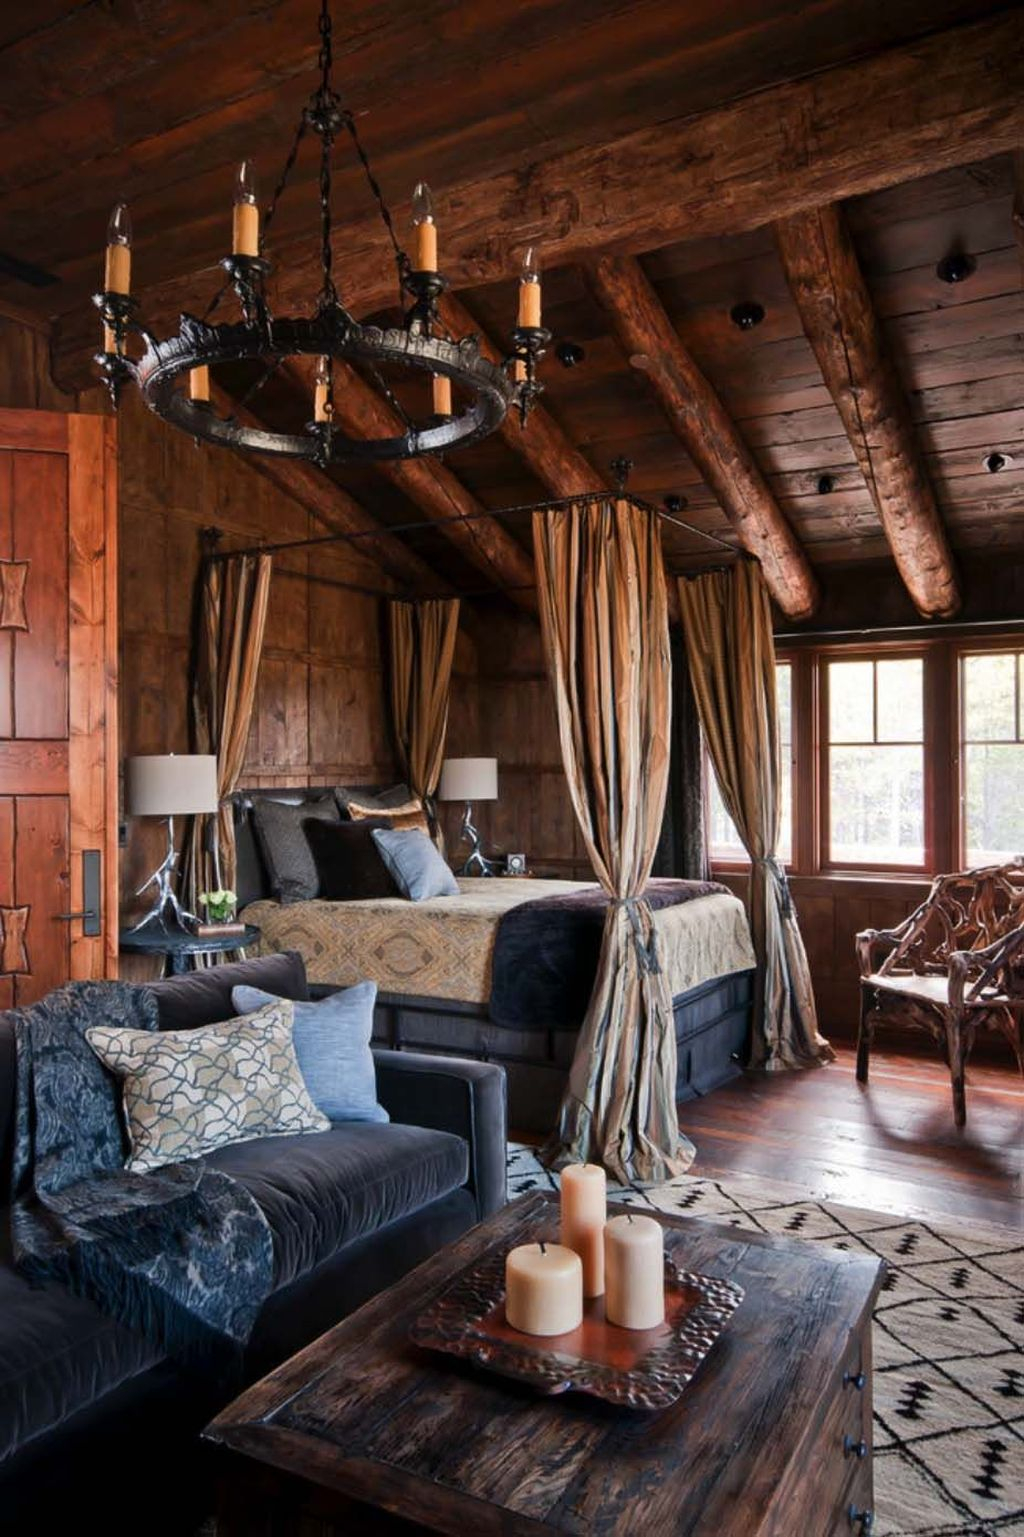 Gorgeous Log Cabin Style Home Interior Design37